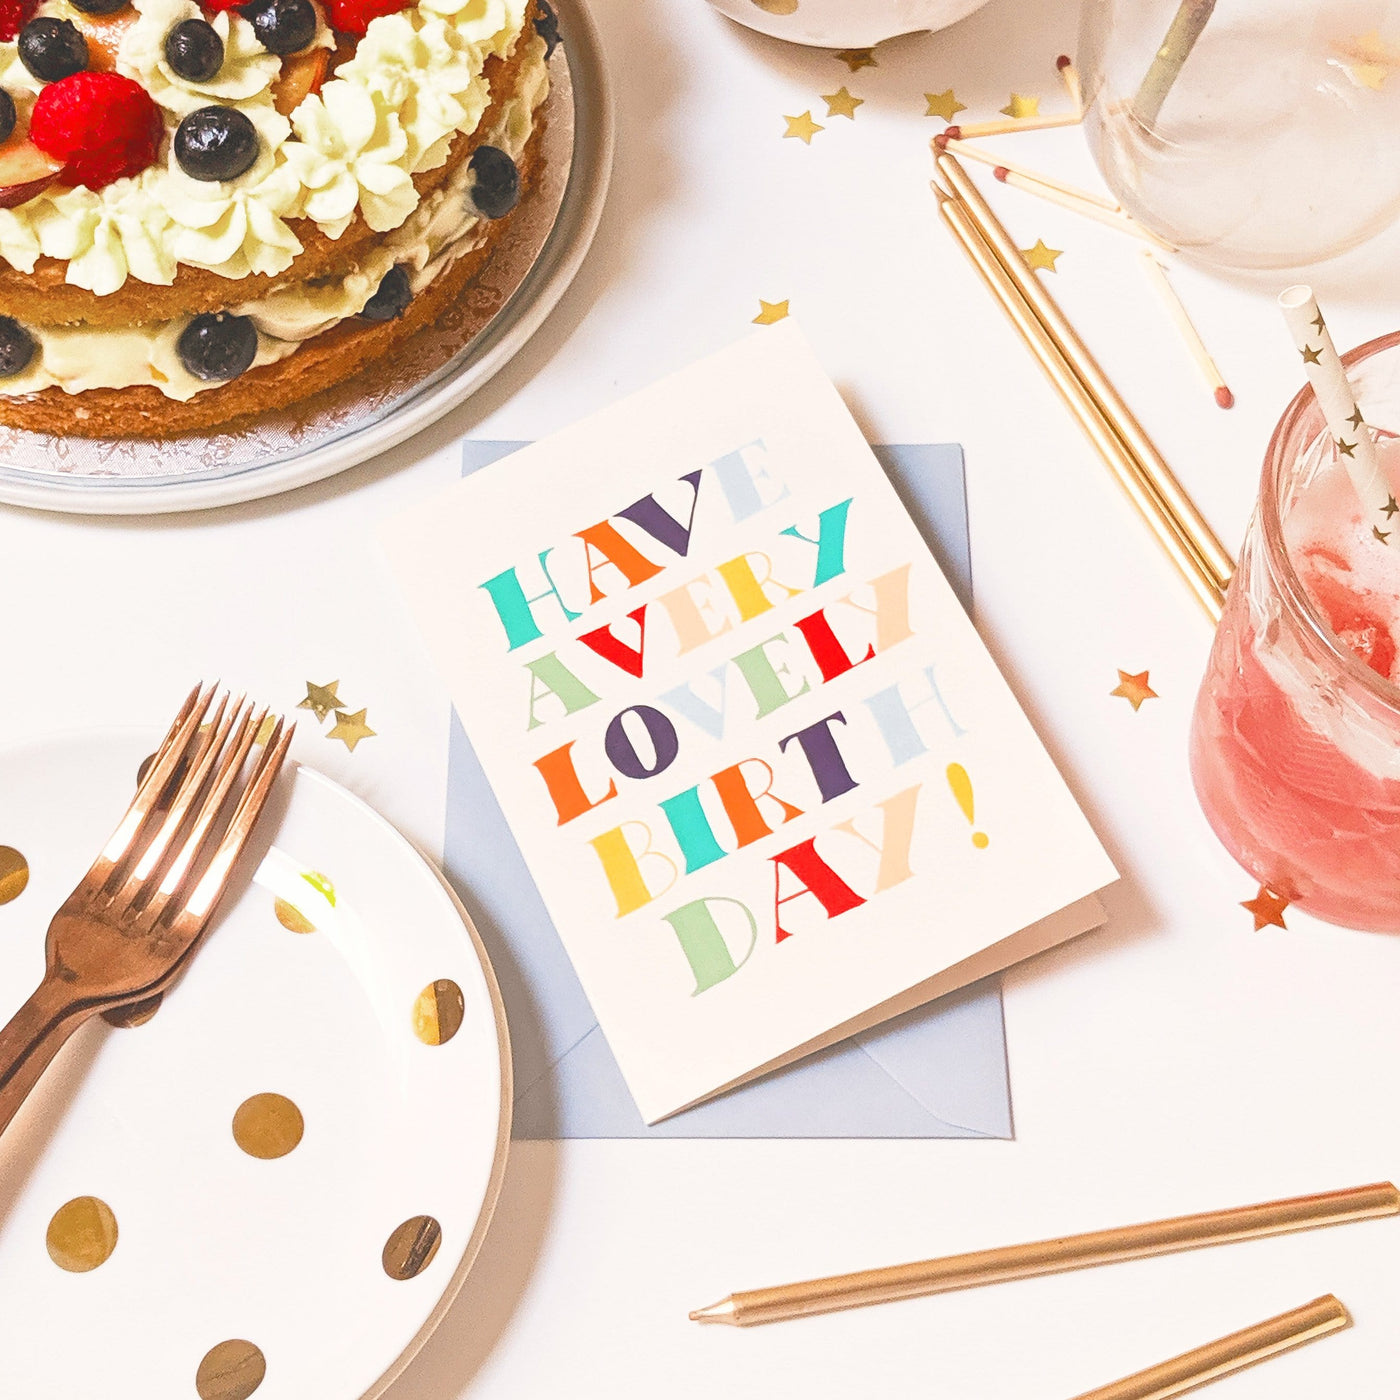 A Hand Lettered Rainbow Typography Card Reading Have A Very Lovely Birthday With A Pale Grey Envelope On A Party Table - Annie Dornan Smith